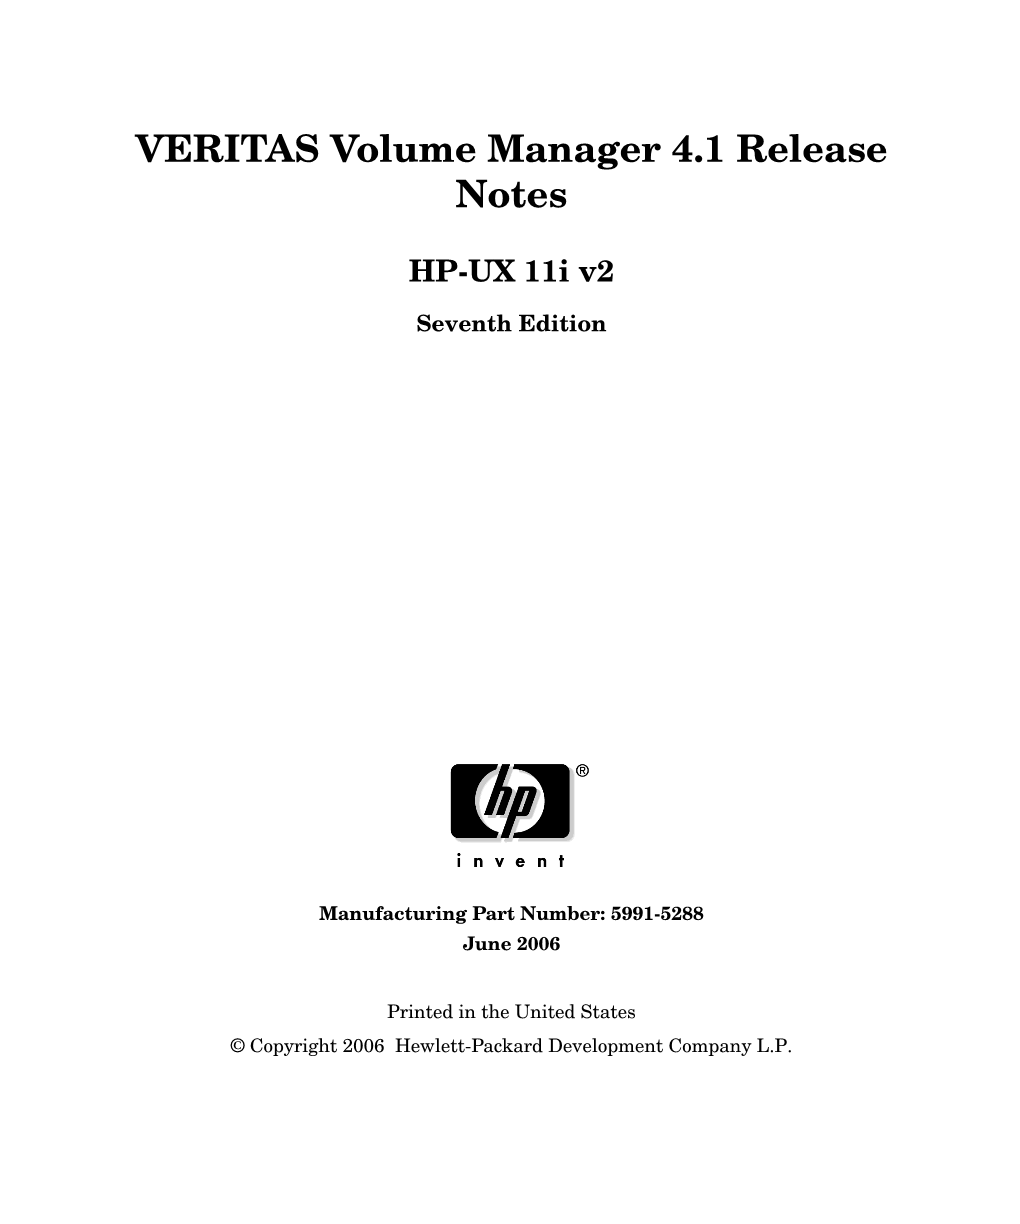 VERITAS Volume Manager 4.1 Release Notes